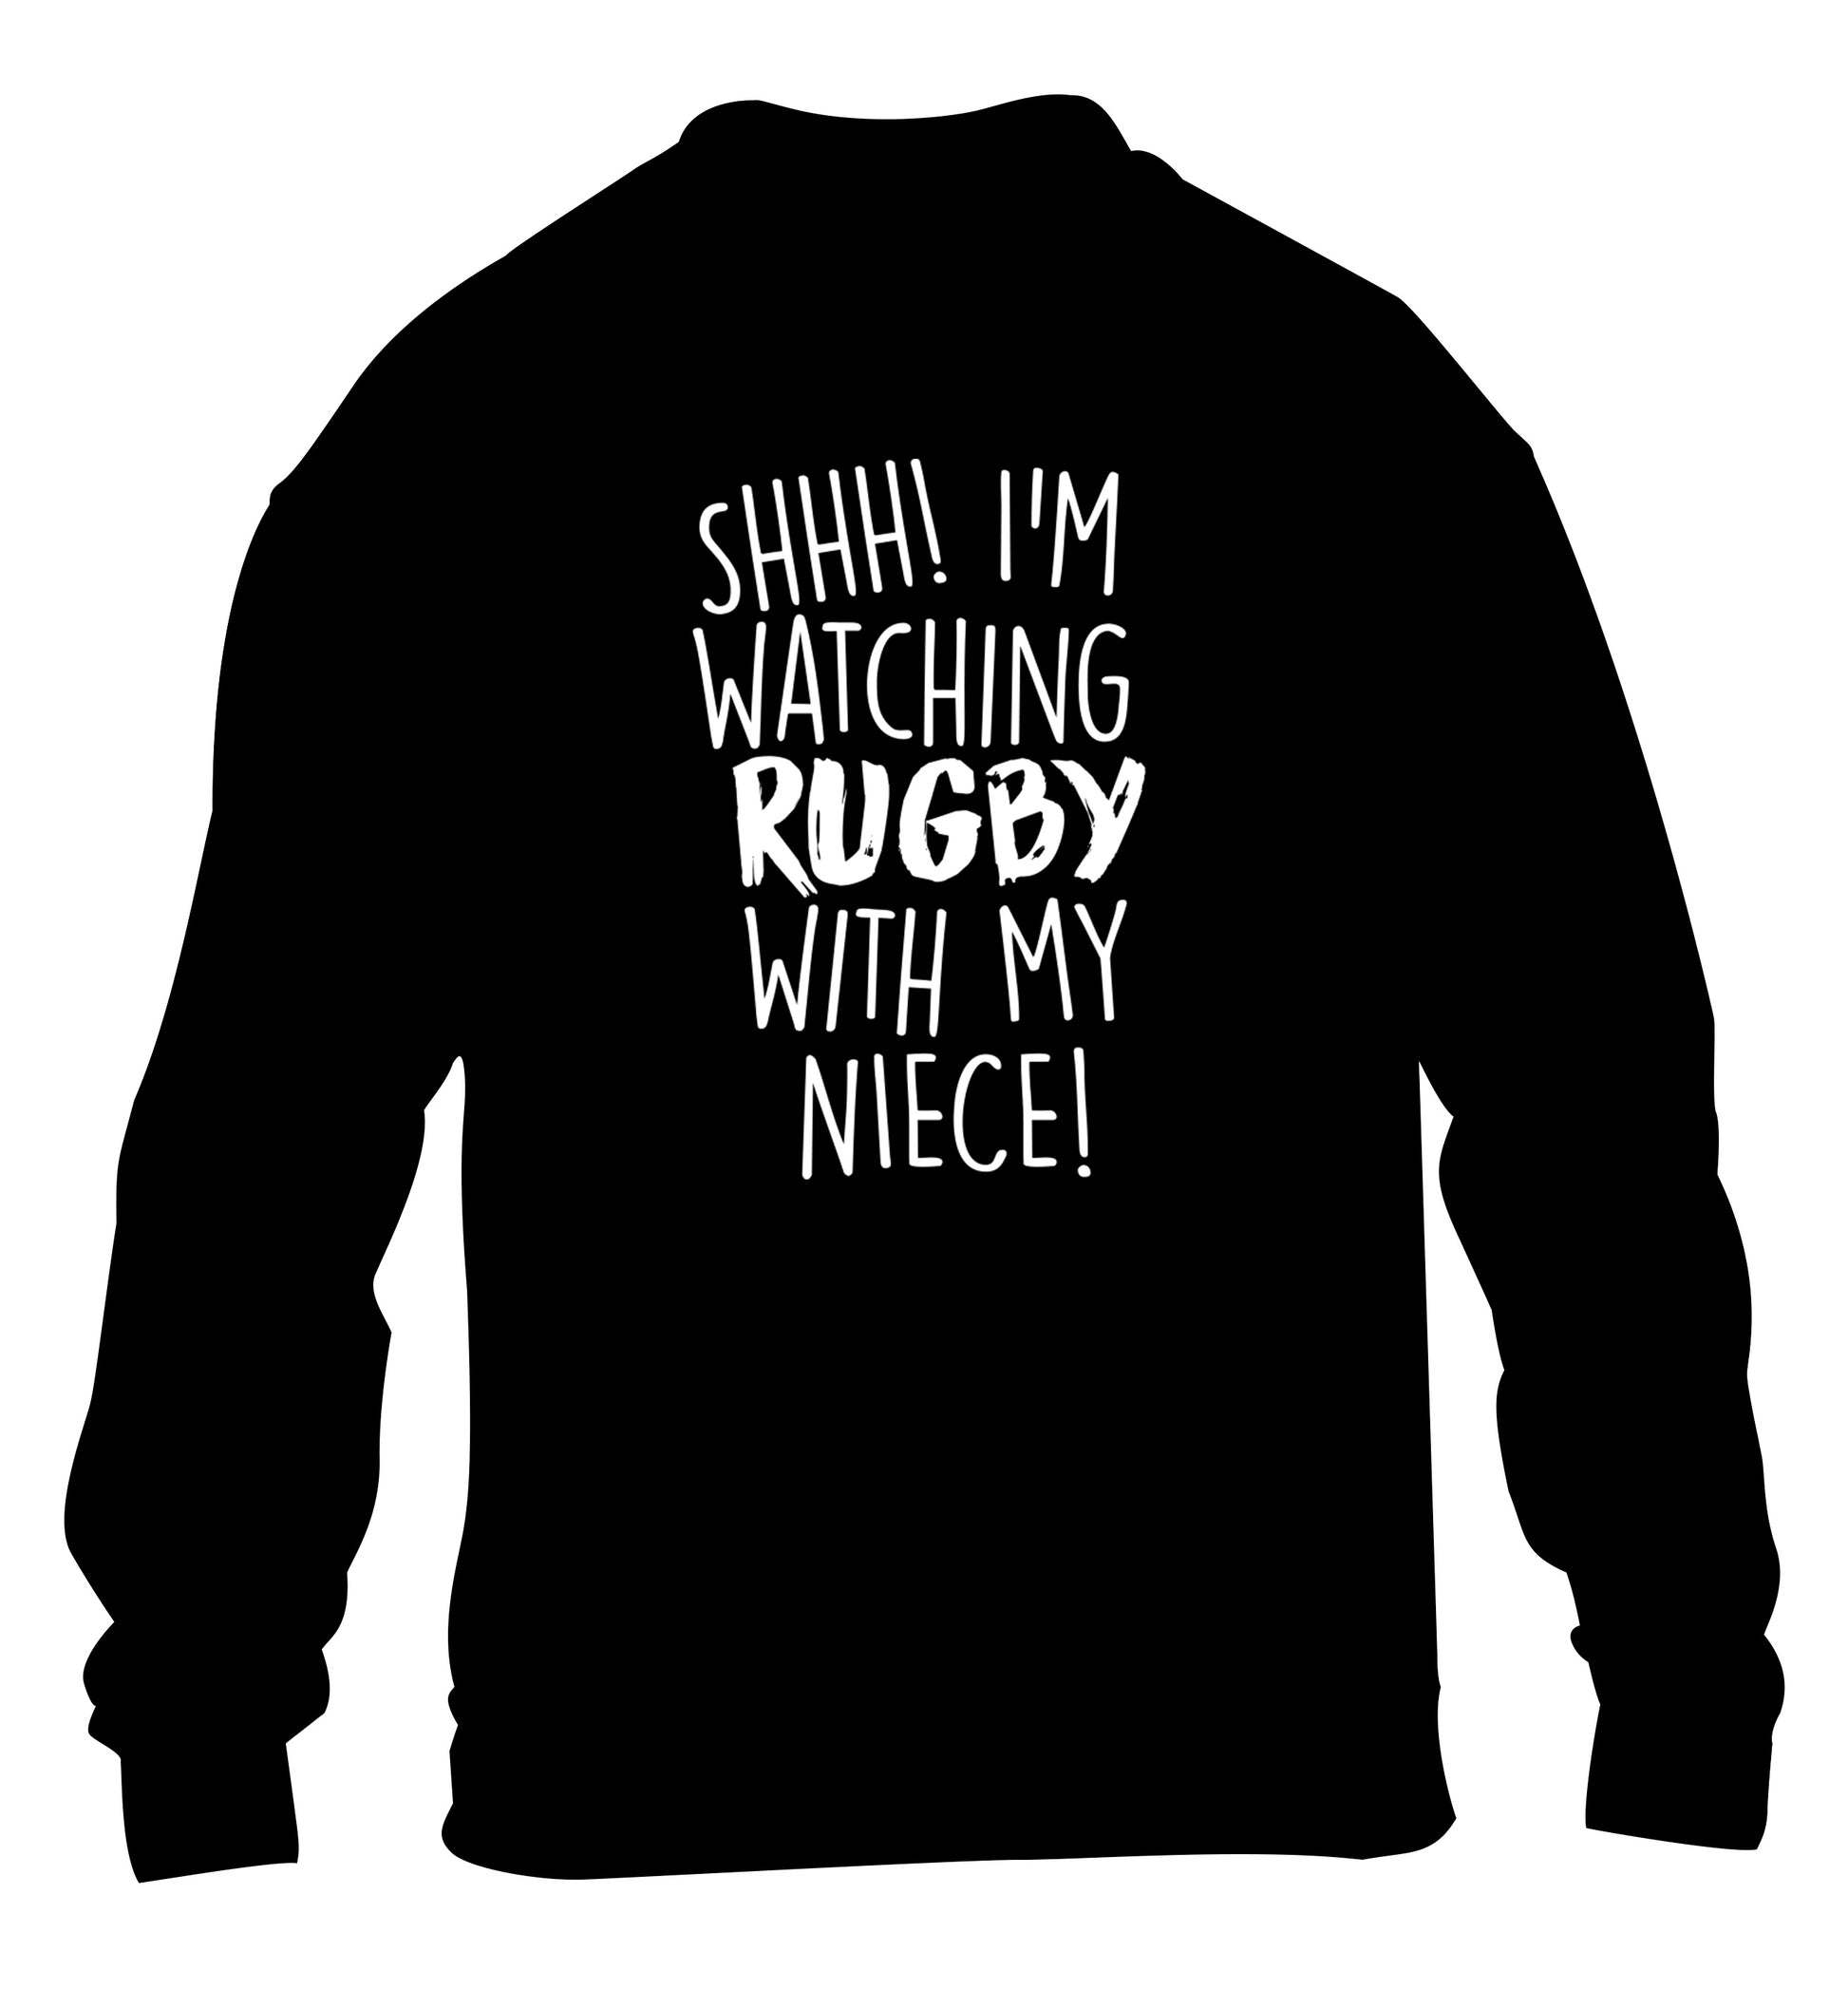 Shh.. I'm watching rugby with my niece children's black sweater 12-13 Years